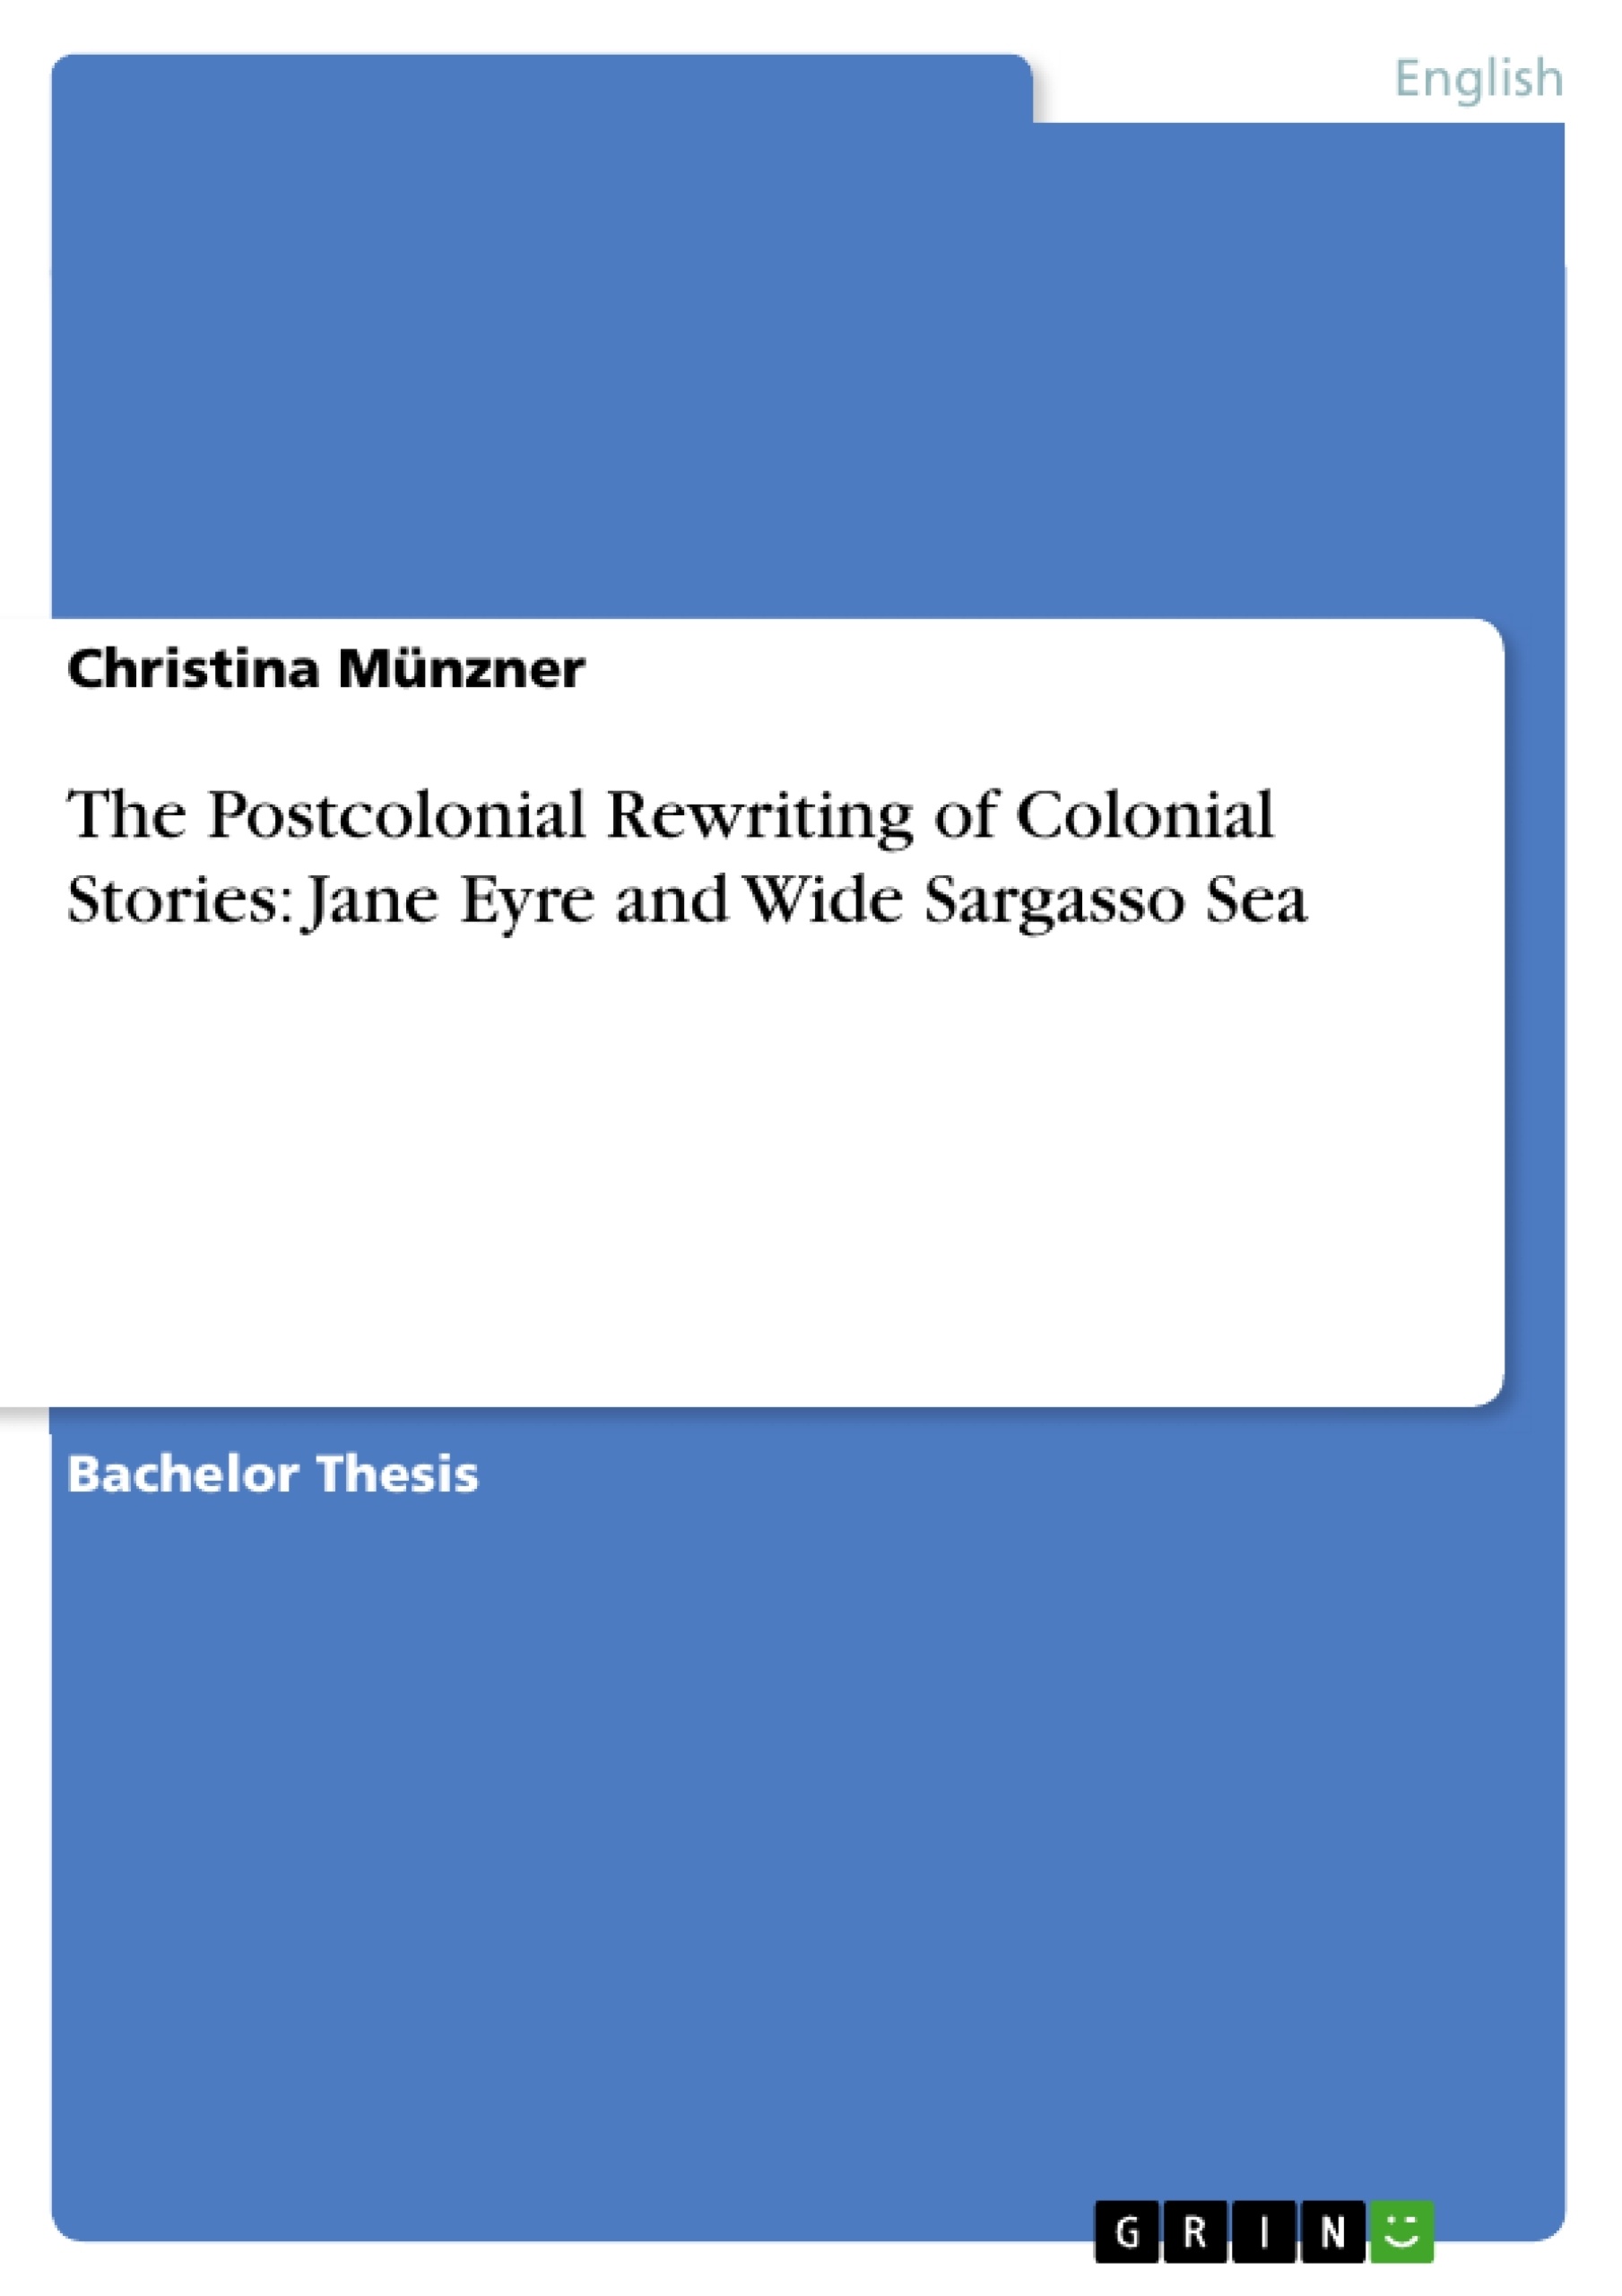 Titre: The Postcolonial Rewriting of Colonial Stories: Jane Eyre and Wide Sargasso Sea